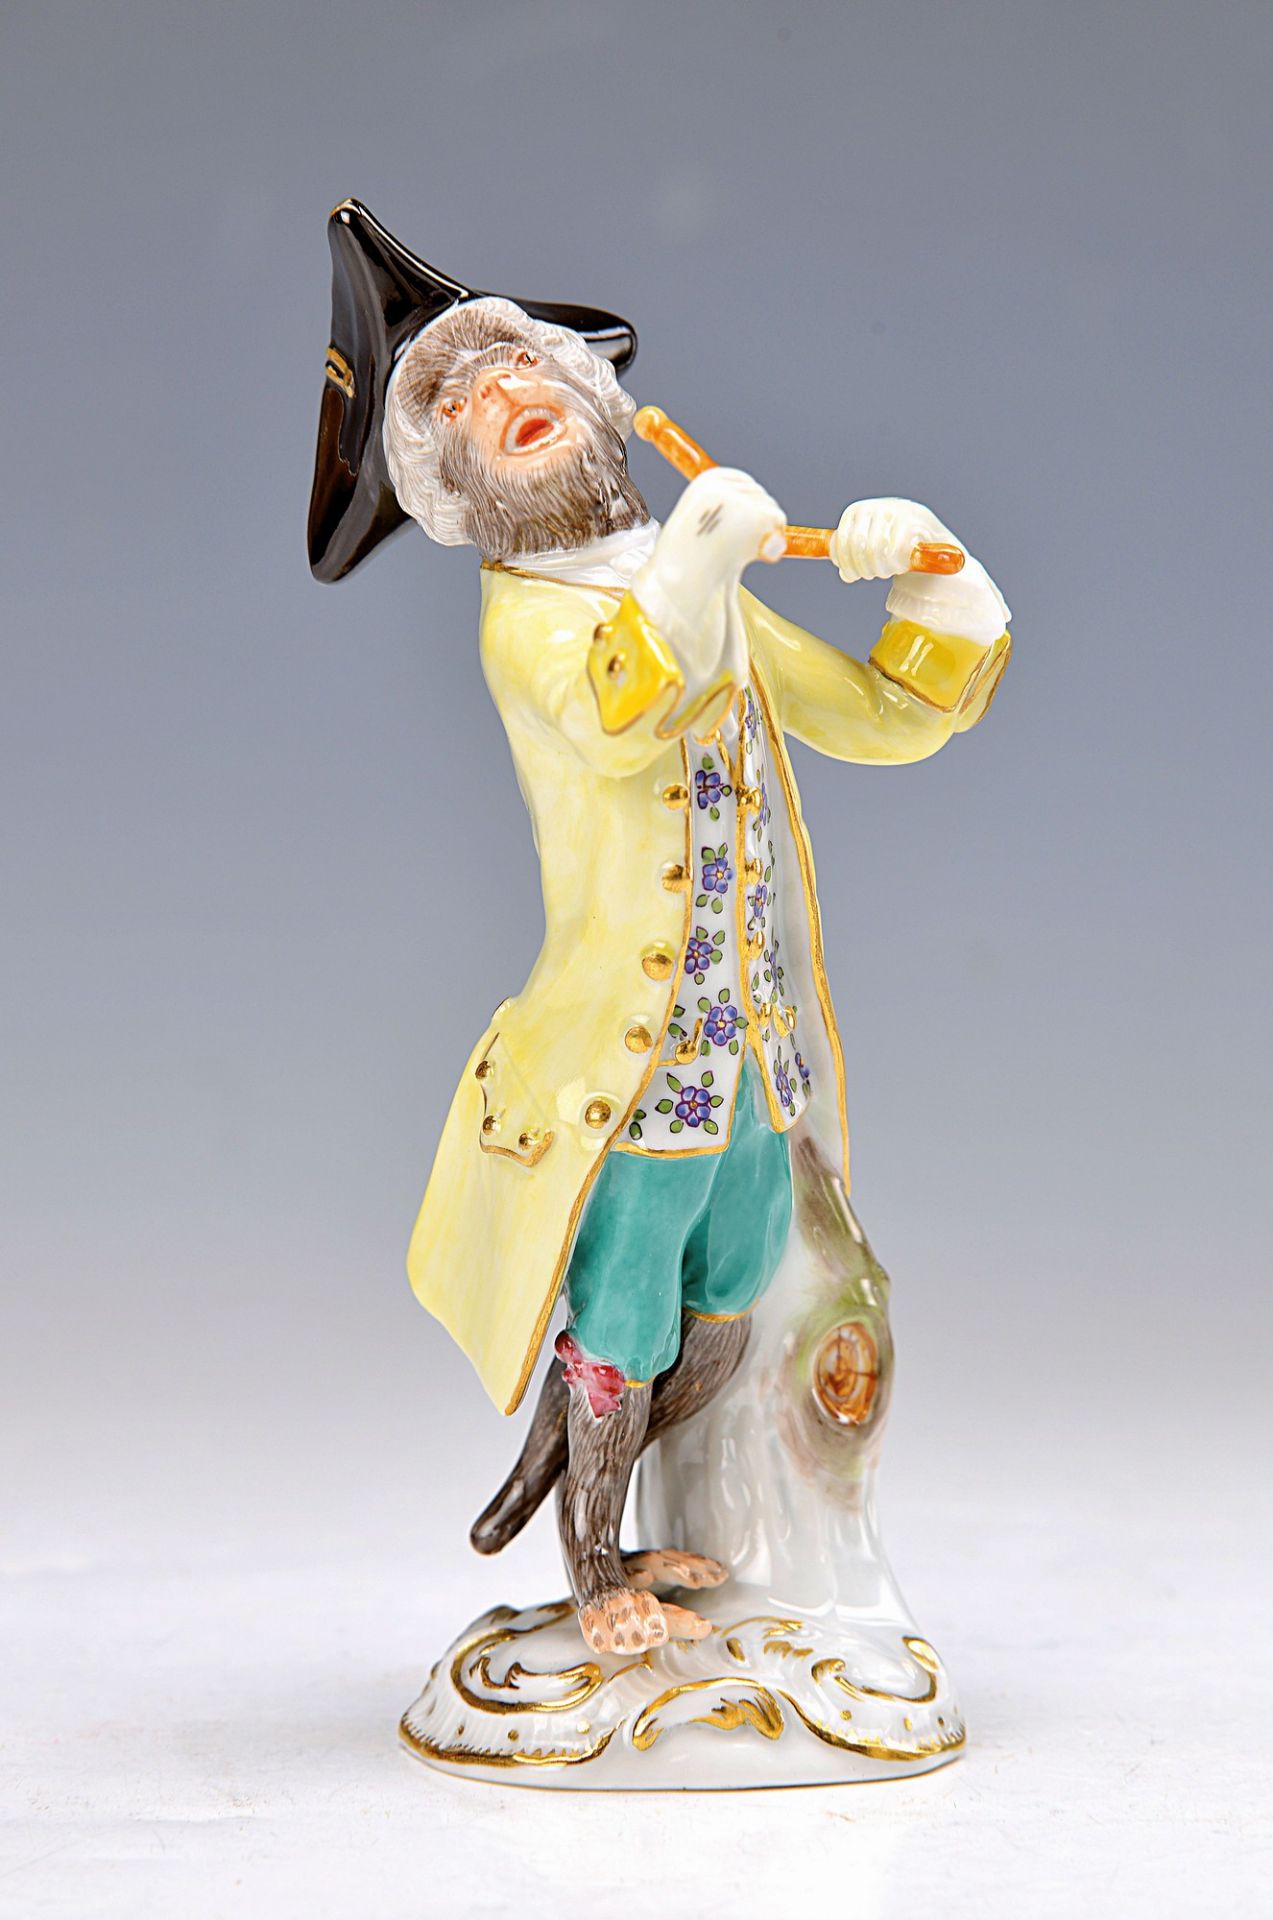 figurine, Meissen, 20th c., drummer of the monkey band after Kändler, painted in bright colors, gold